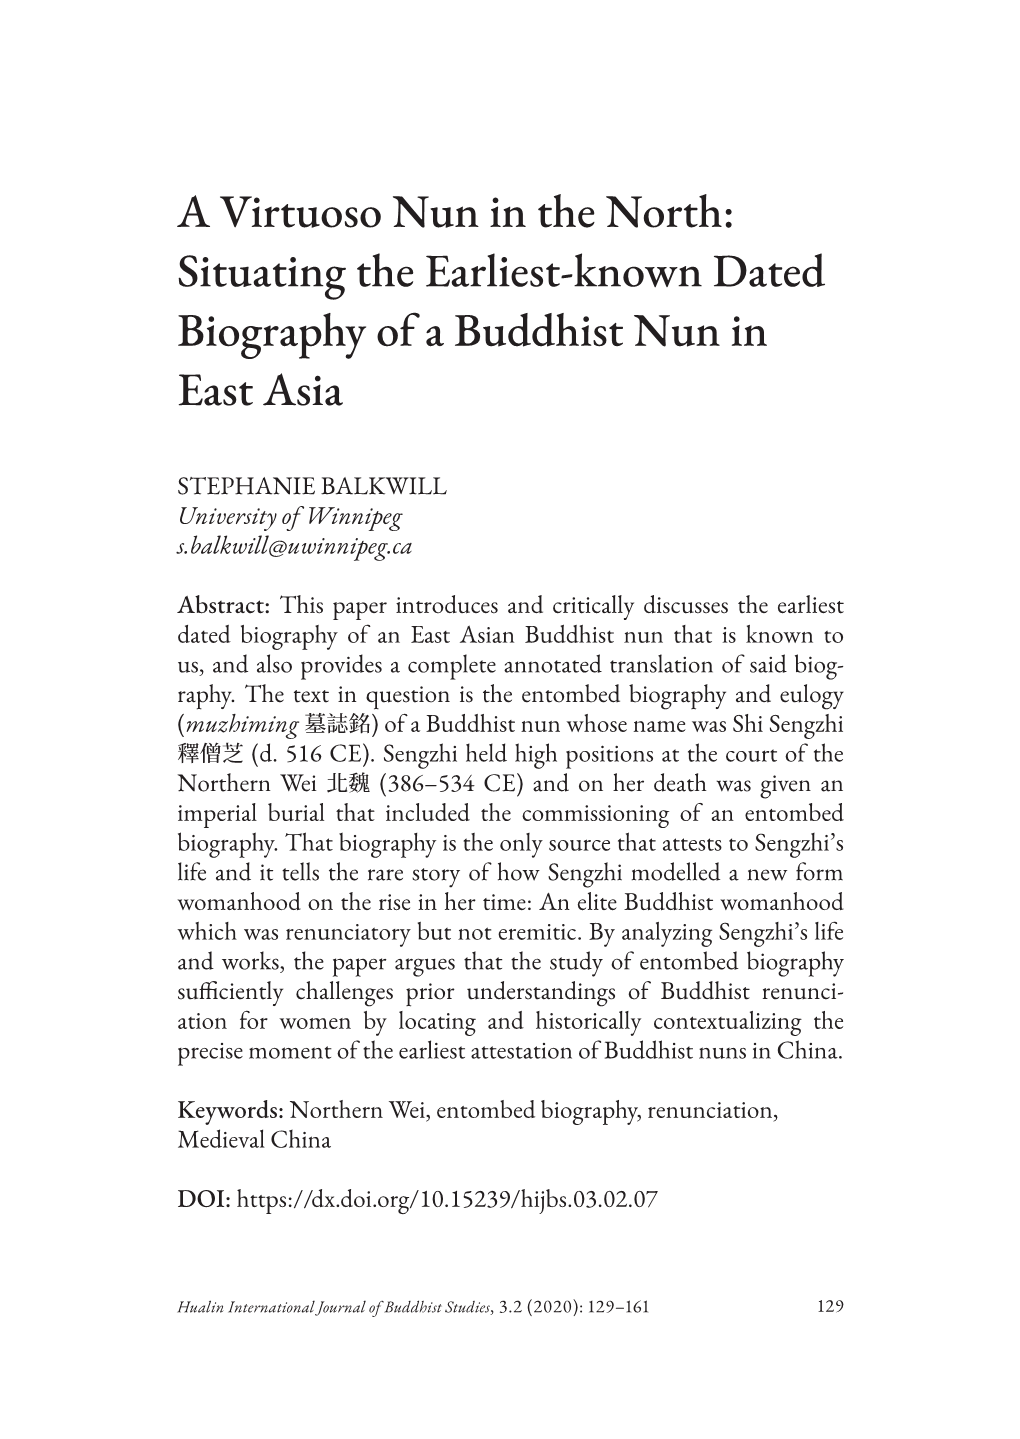 Situating the Earliest-Known Dated Biography of a Buddhist Nun in East Asia